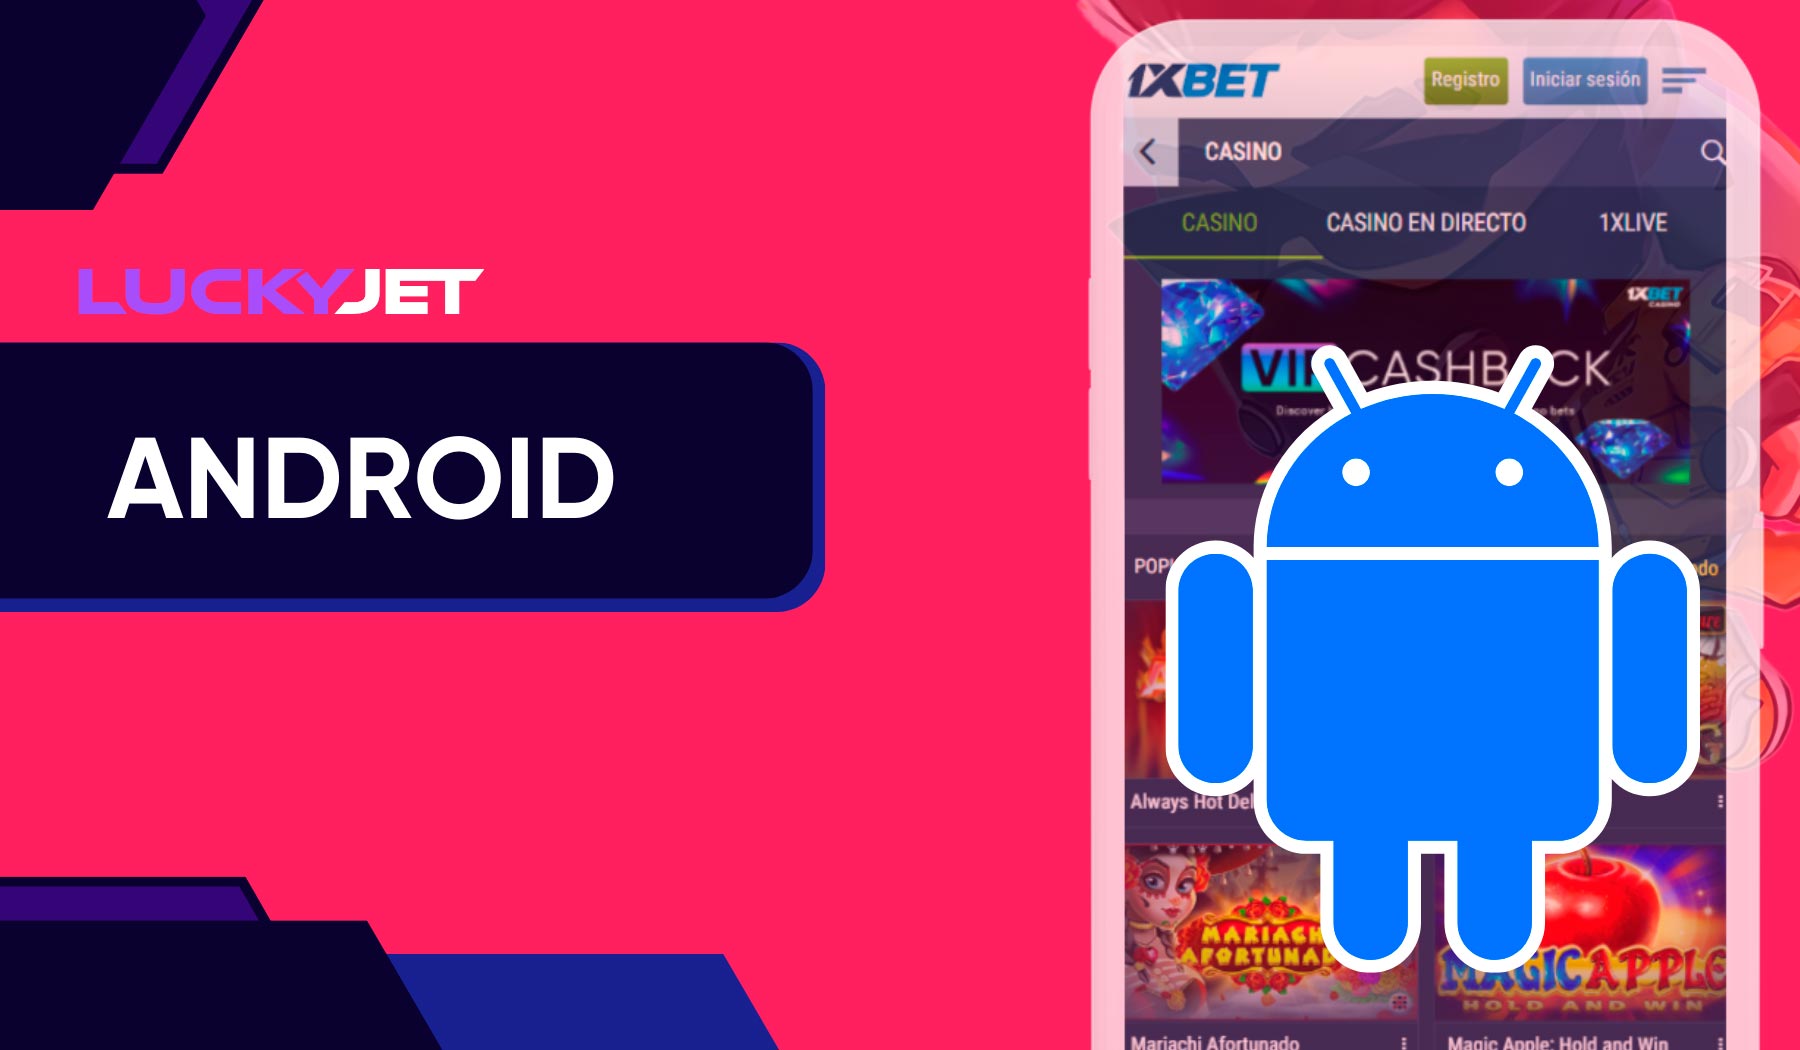 The 1xbet app for Android allows you to play Lucky Jet.